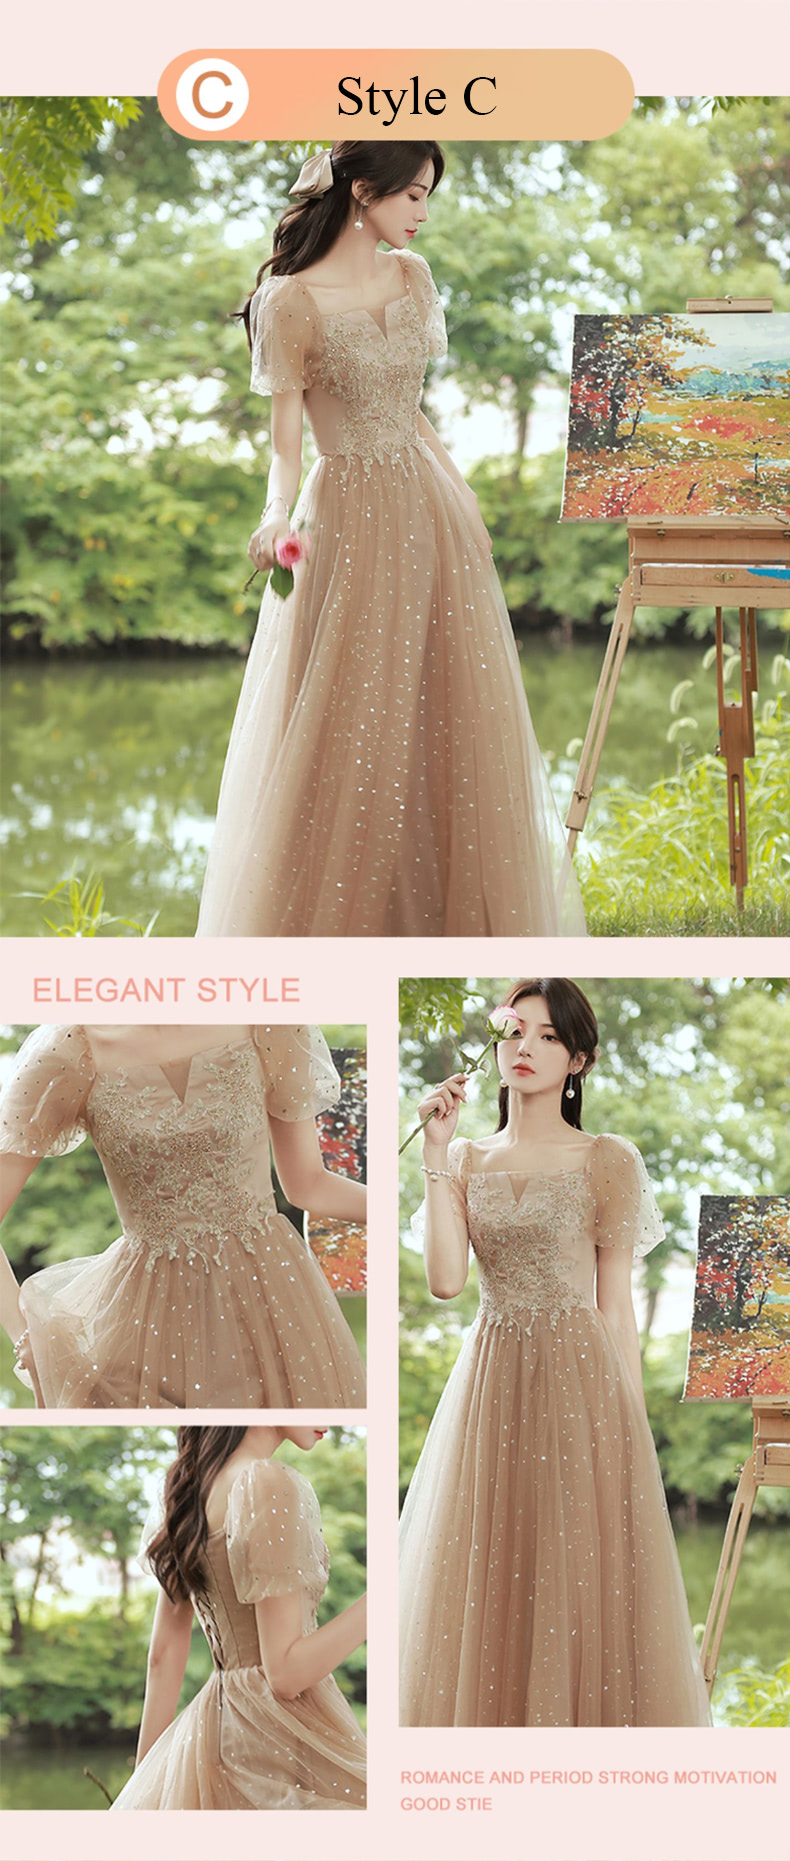 Champagne-Maid-of-Honor-Bridal-Party-Long-Dress-Bridesmaid-Gown19.jpg